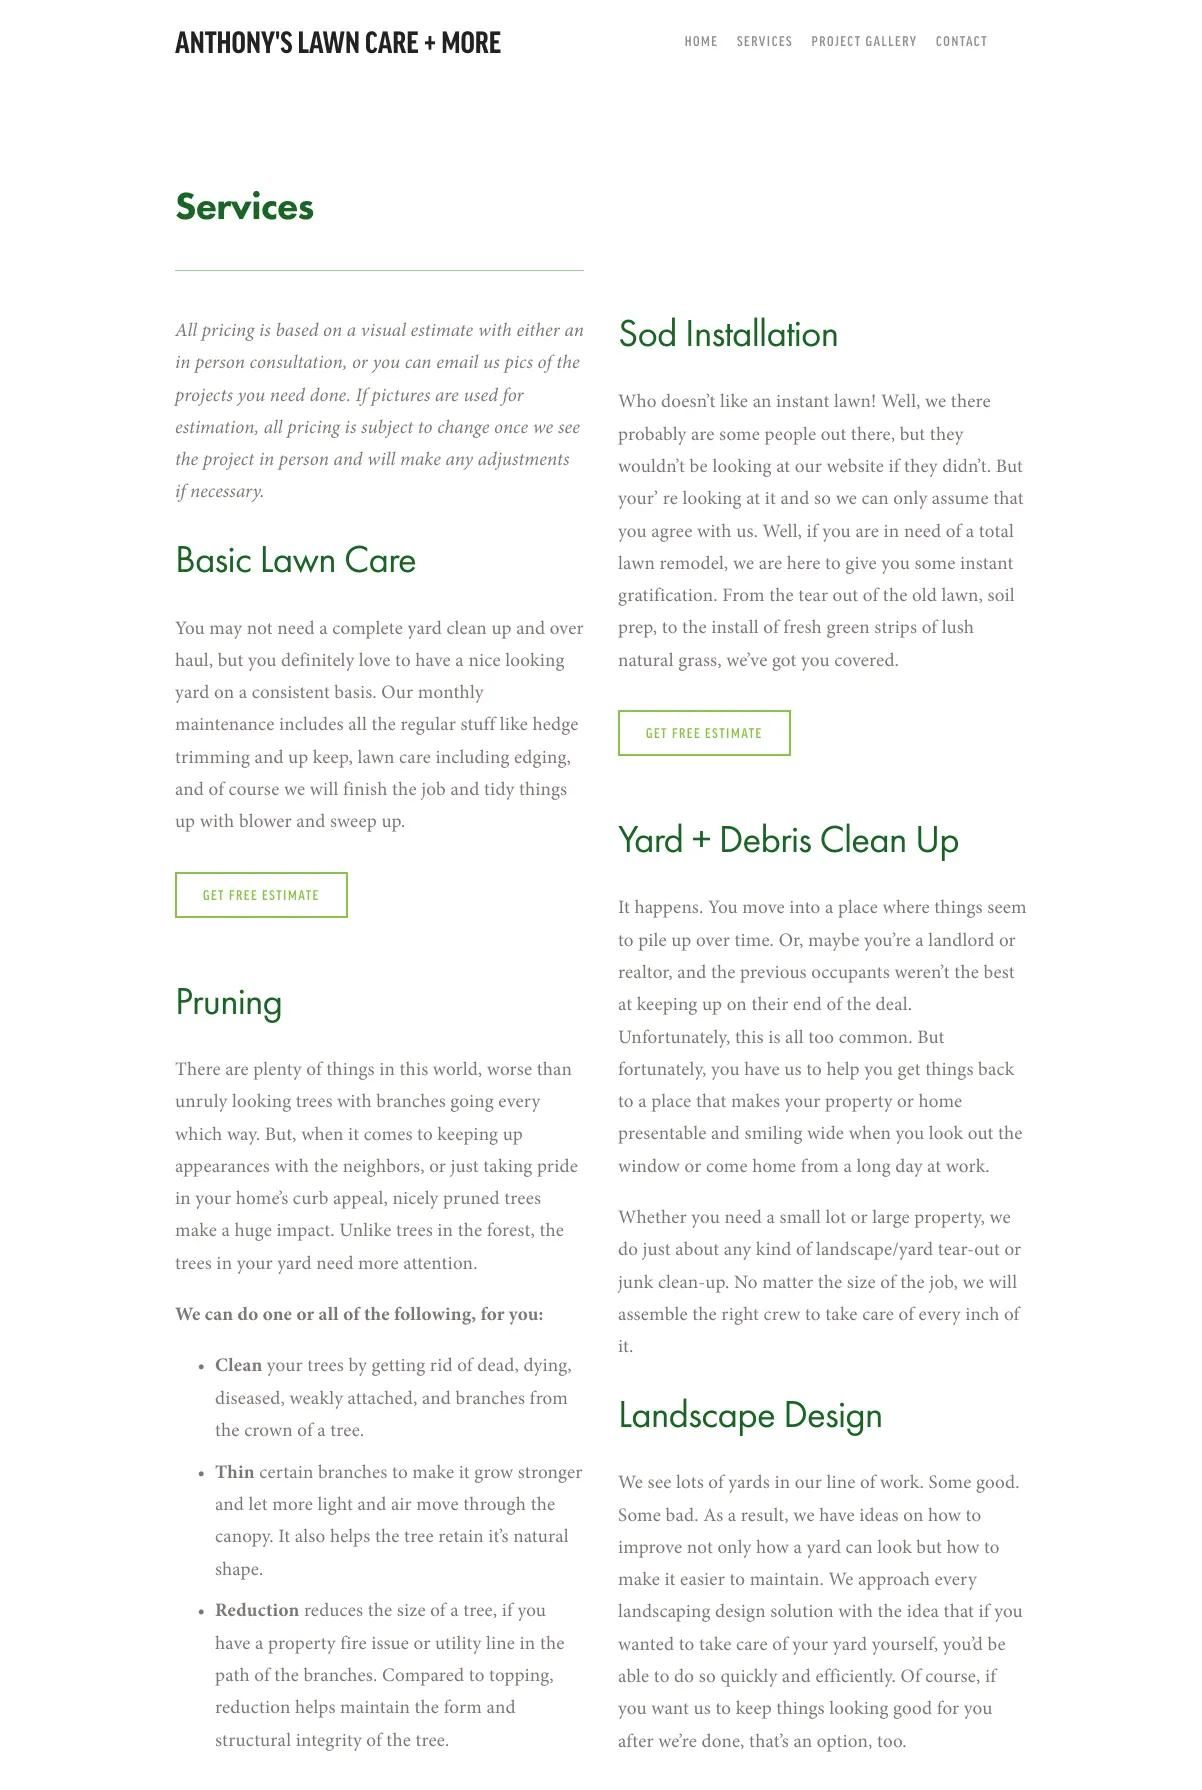 Screenshot 2 of Anthony's Lawn Care + More (Example Squarespace Lawn Care Website)